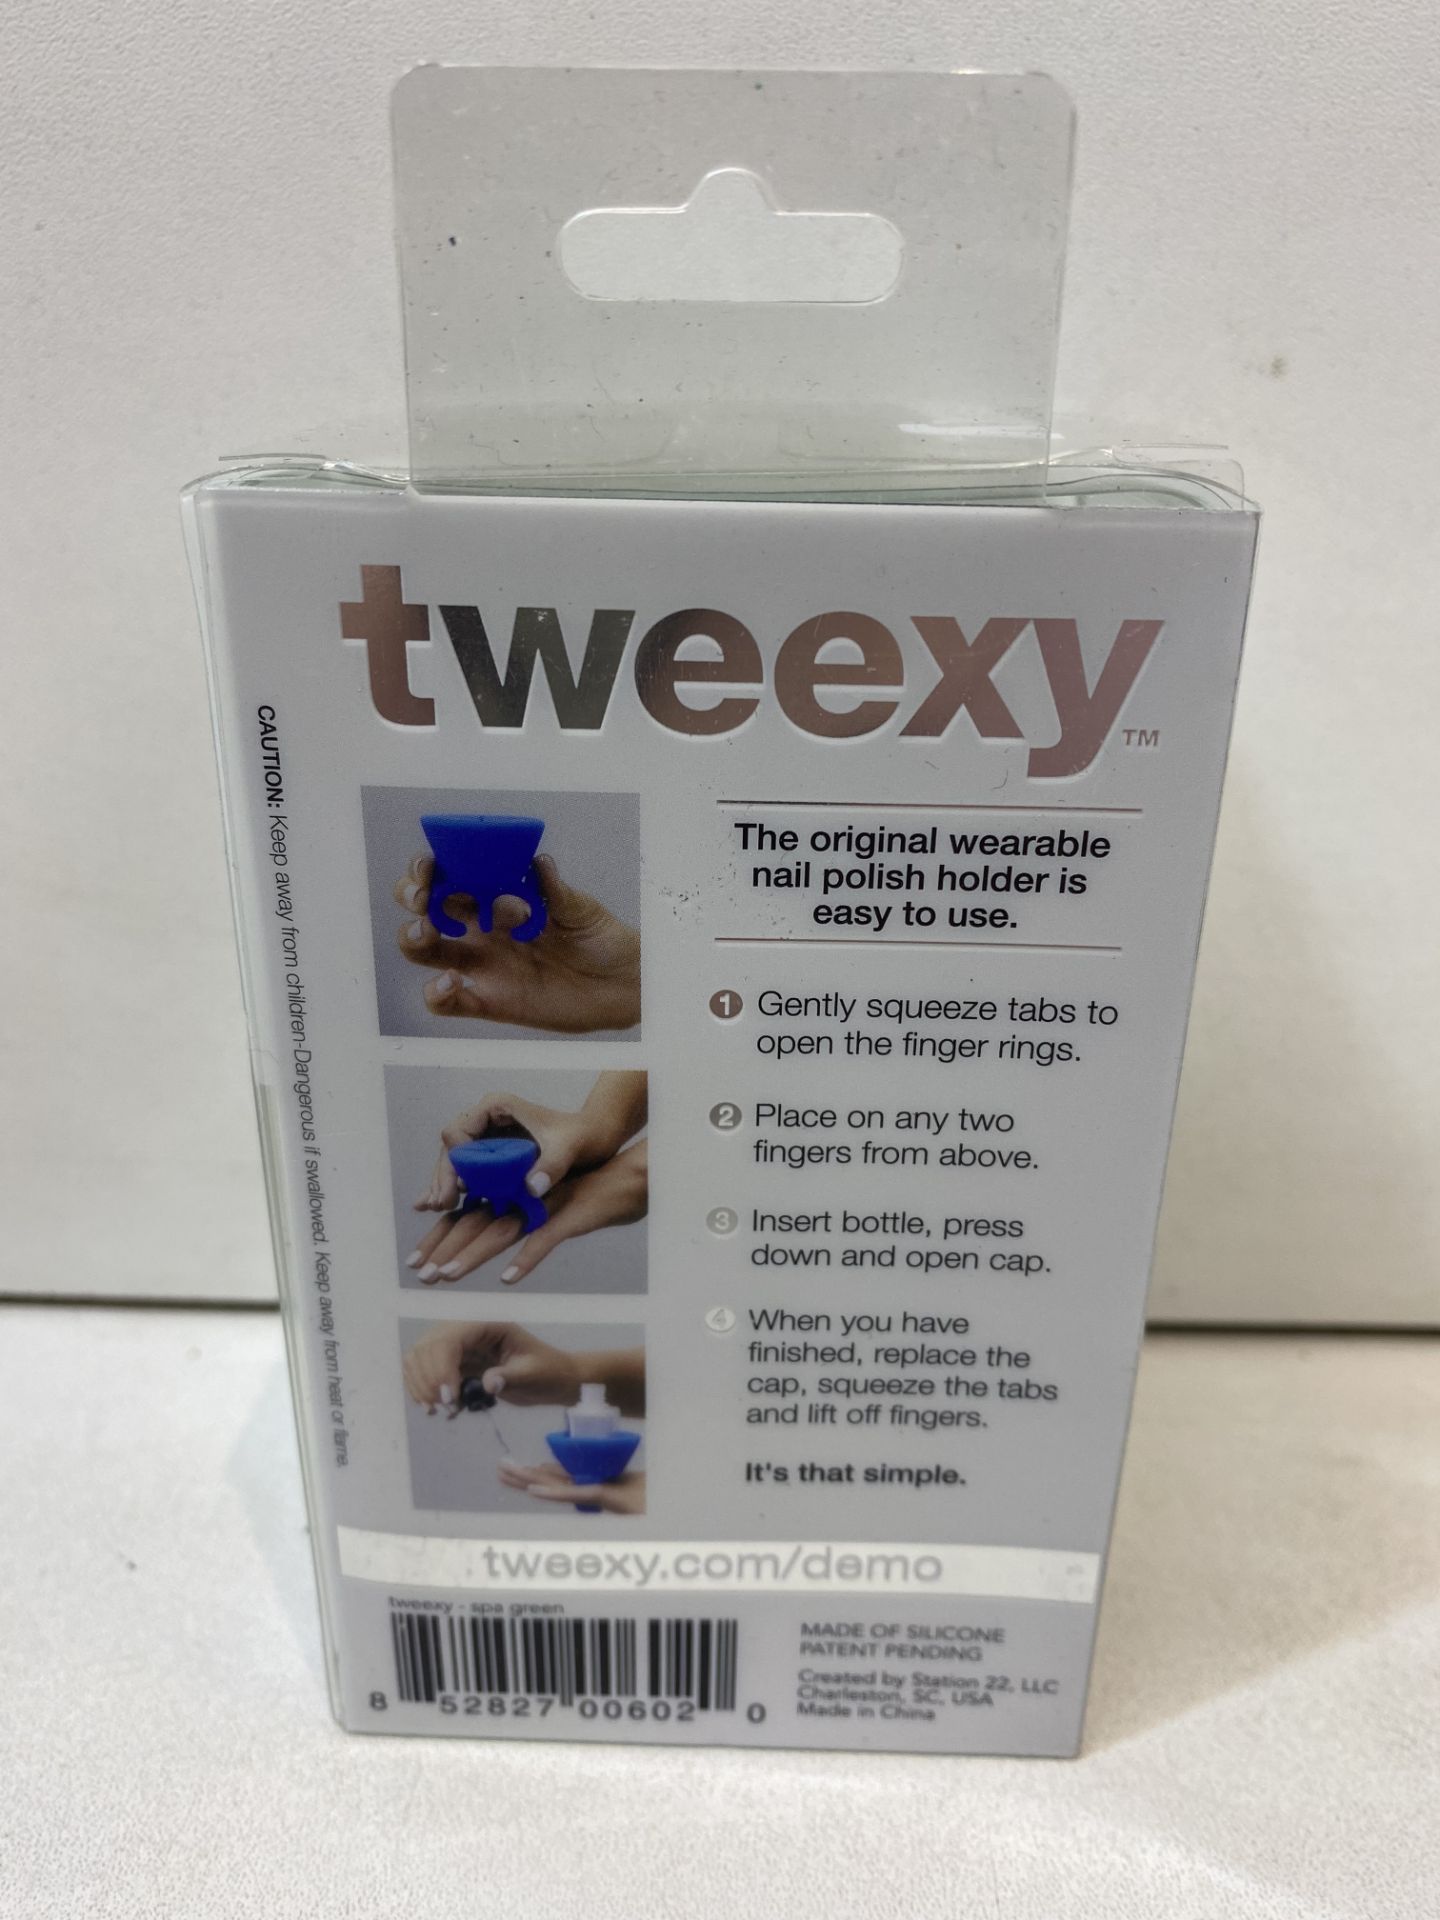 34 x Various Tweexy wearable Nail Polish Holder As Seen In Pictures - Image 3 of 4